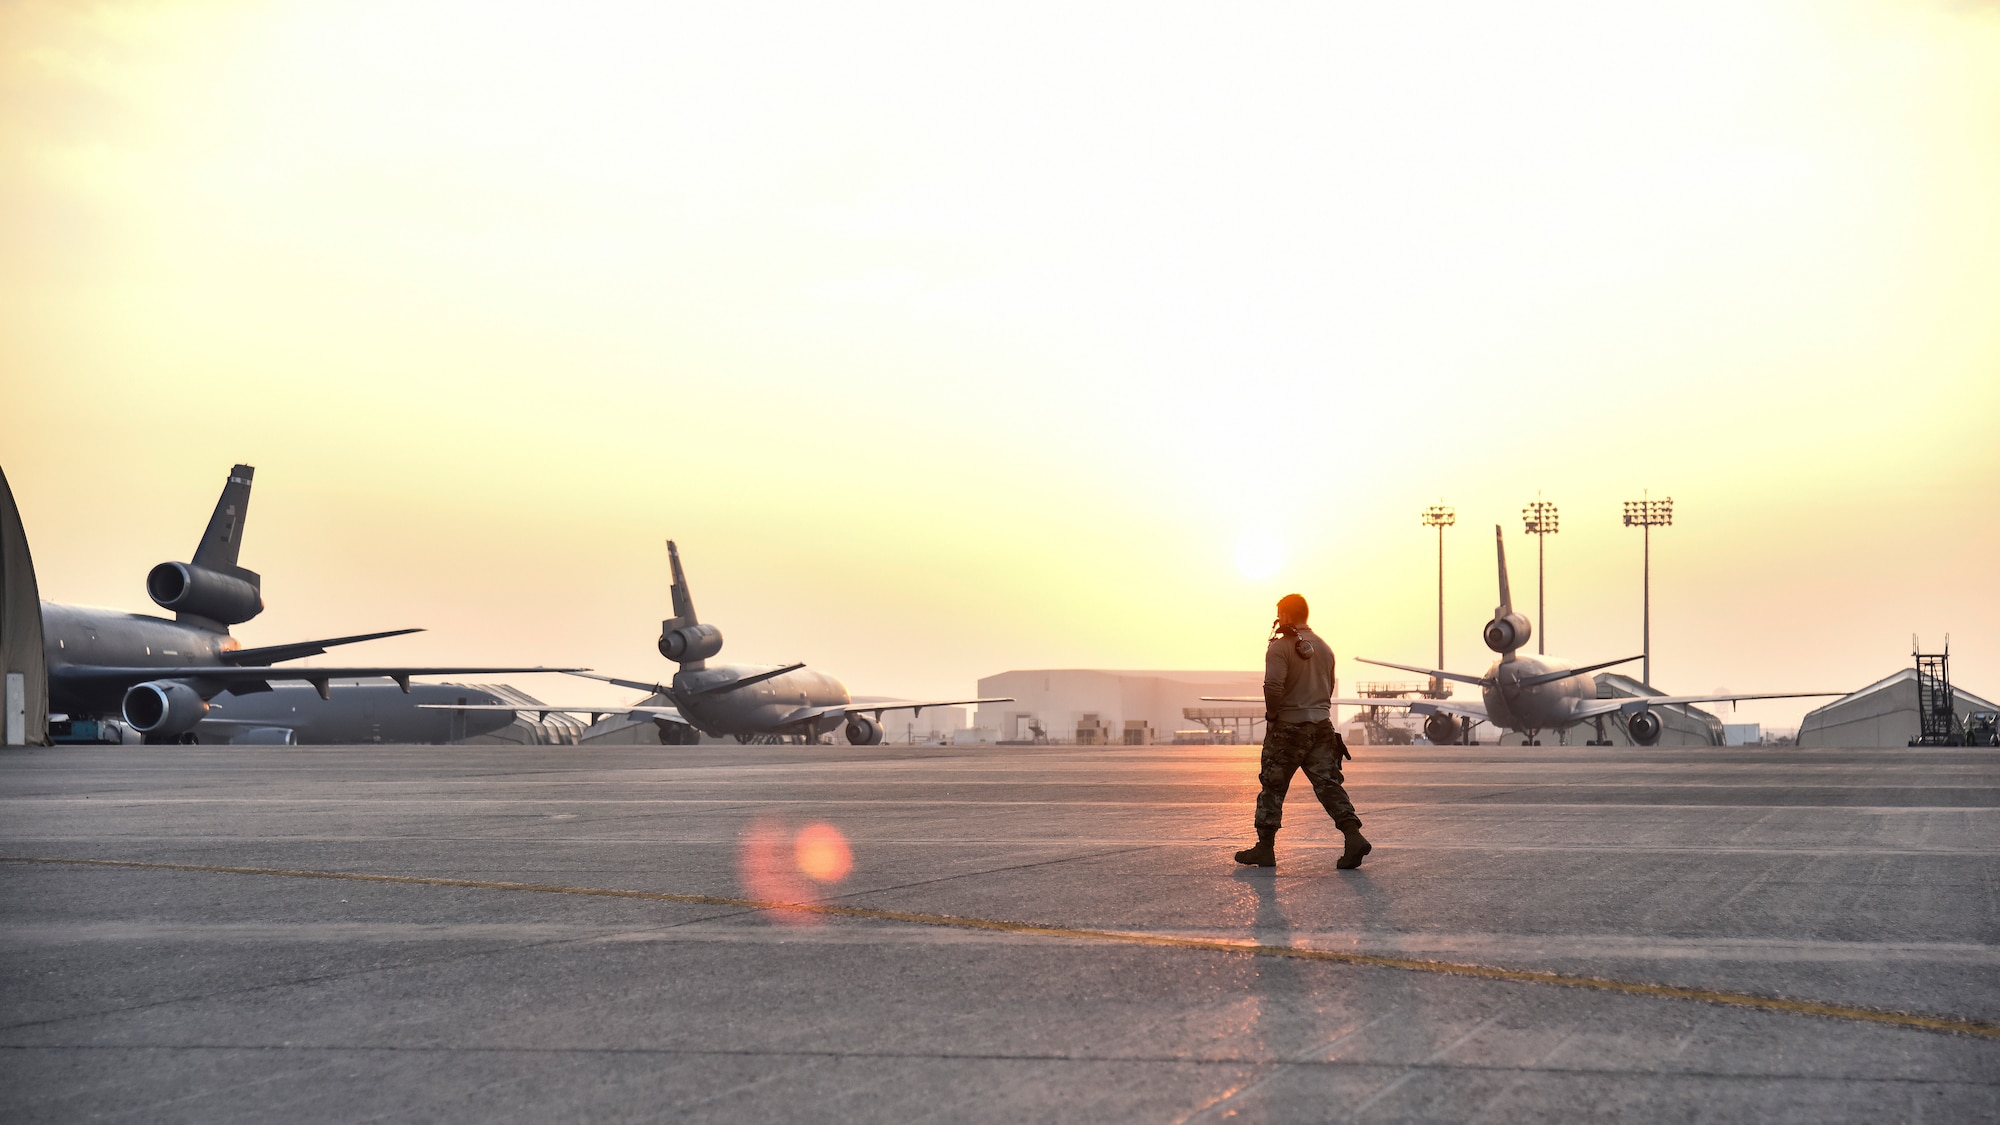 U.S. Air Force Senior Airman Devon Gilbert, 380th Expeditionary Aircraft Maintenance Squadron E-3 AWACS Sentry crew chief, walks down the flight line at Al Dhafra Air Base, United Arab Emirates, Dec. 20, 2018. The crew chief’s extensive list of responsibilities including for pre-, post- and thru-flight checks, and well as various inspections, allows them to fully understand their vital role, making them jacks-of-all-trades when it comes to repairing the aircraft. (U.S. Air Force photo by Senior Airman Mya M. Crosby)